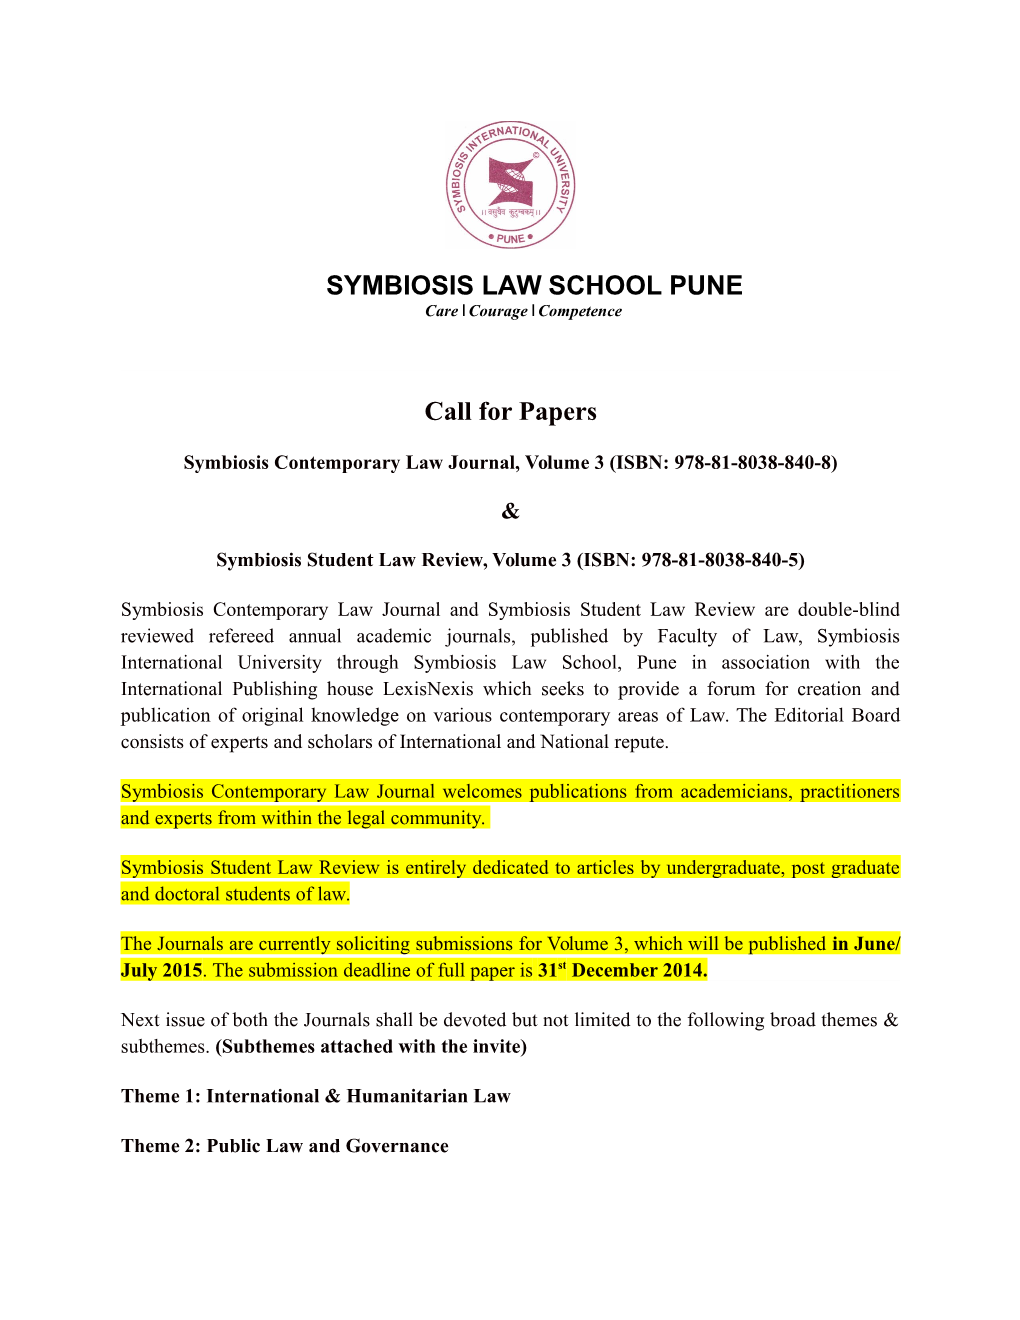 SYMBIOSIS LAW SCHOOL PUNE Call for Papers